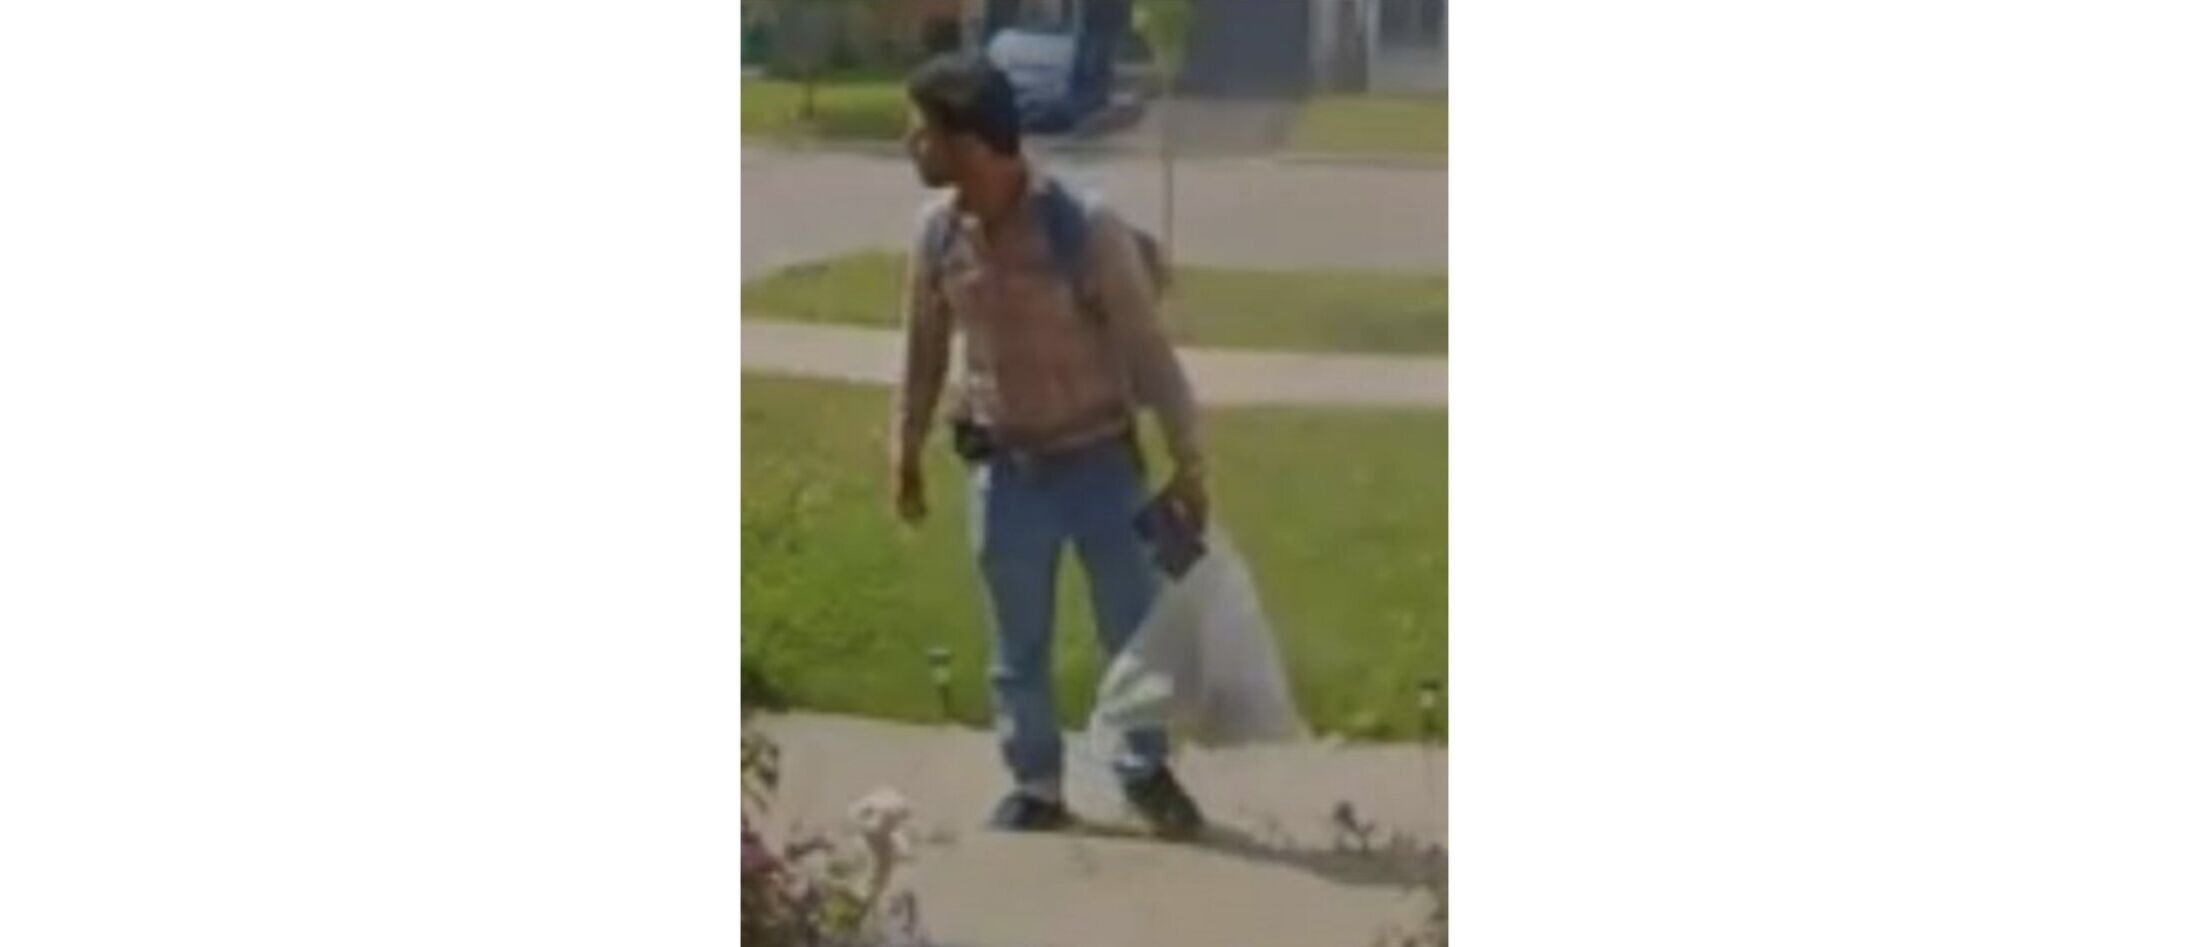 Peel police looking for man who allegedly exposed himself to 11-year-old girl in Brampton image